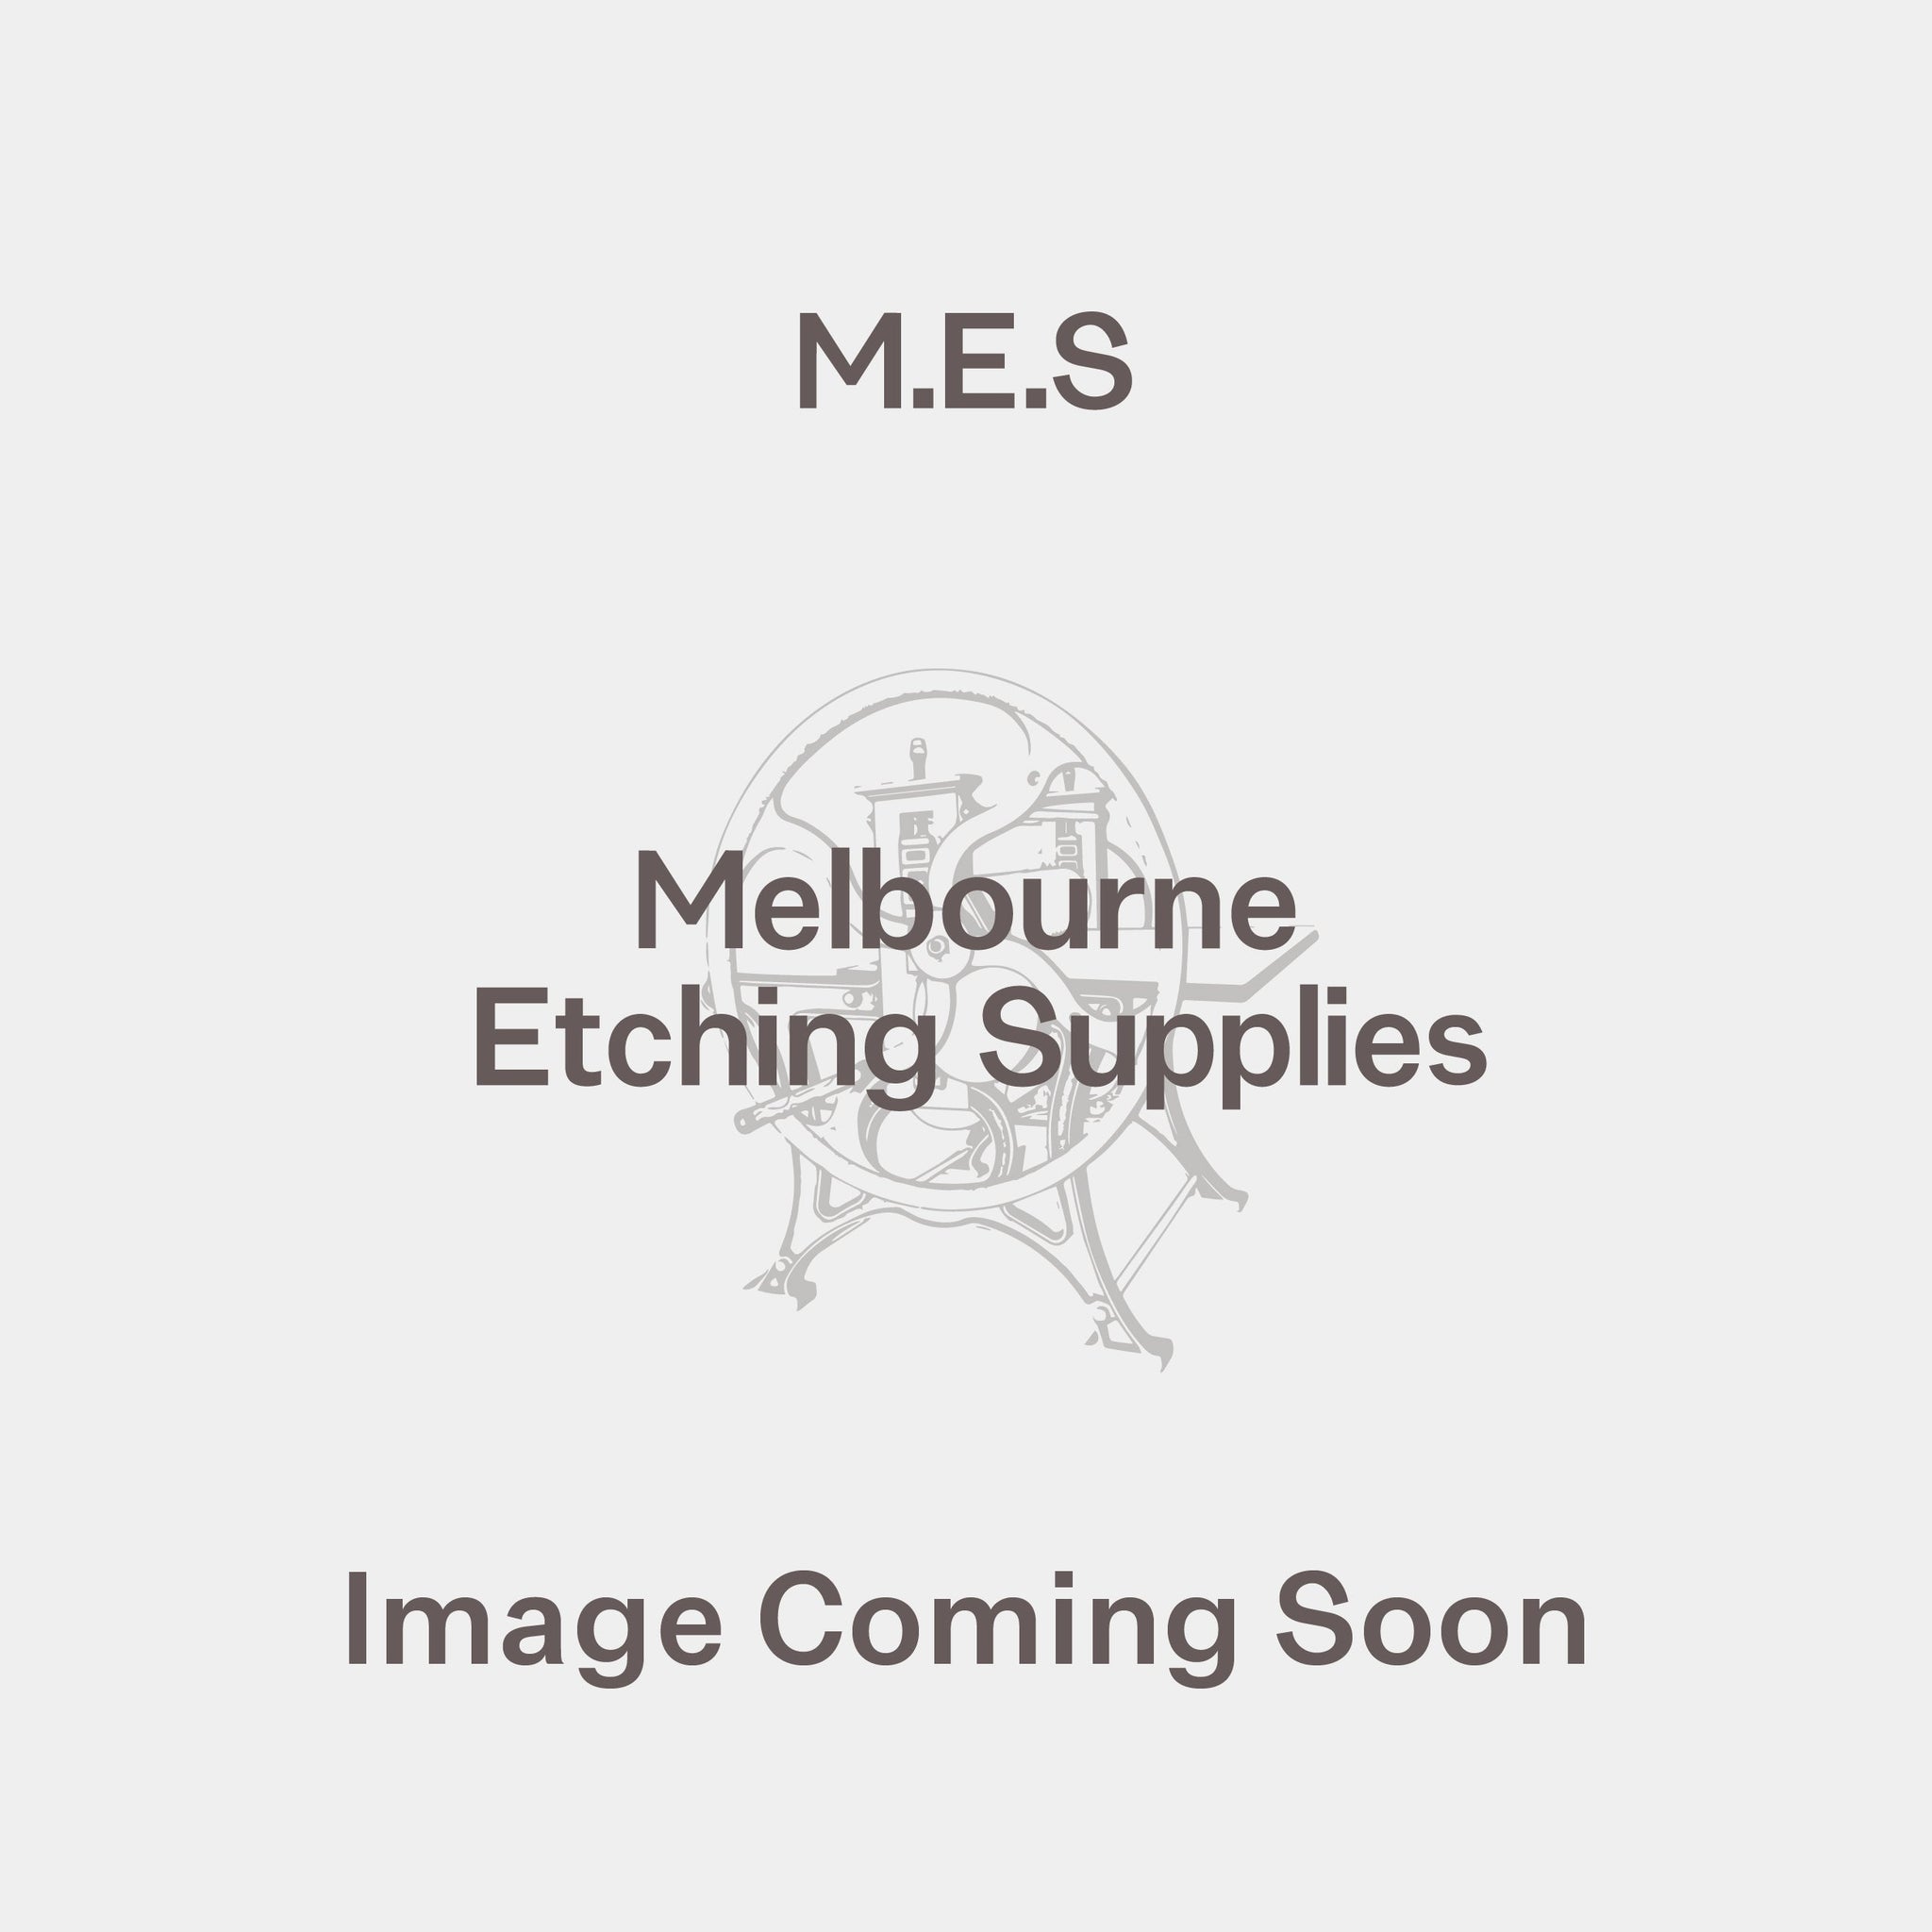 Eco Cartridge Rolls 10 mts - Melbourne Etching Supplies